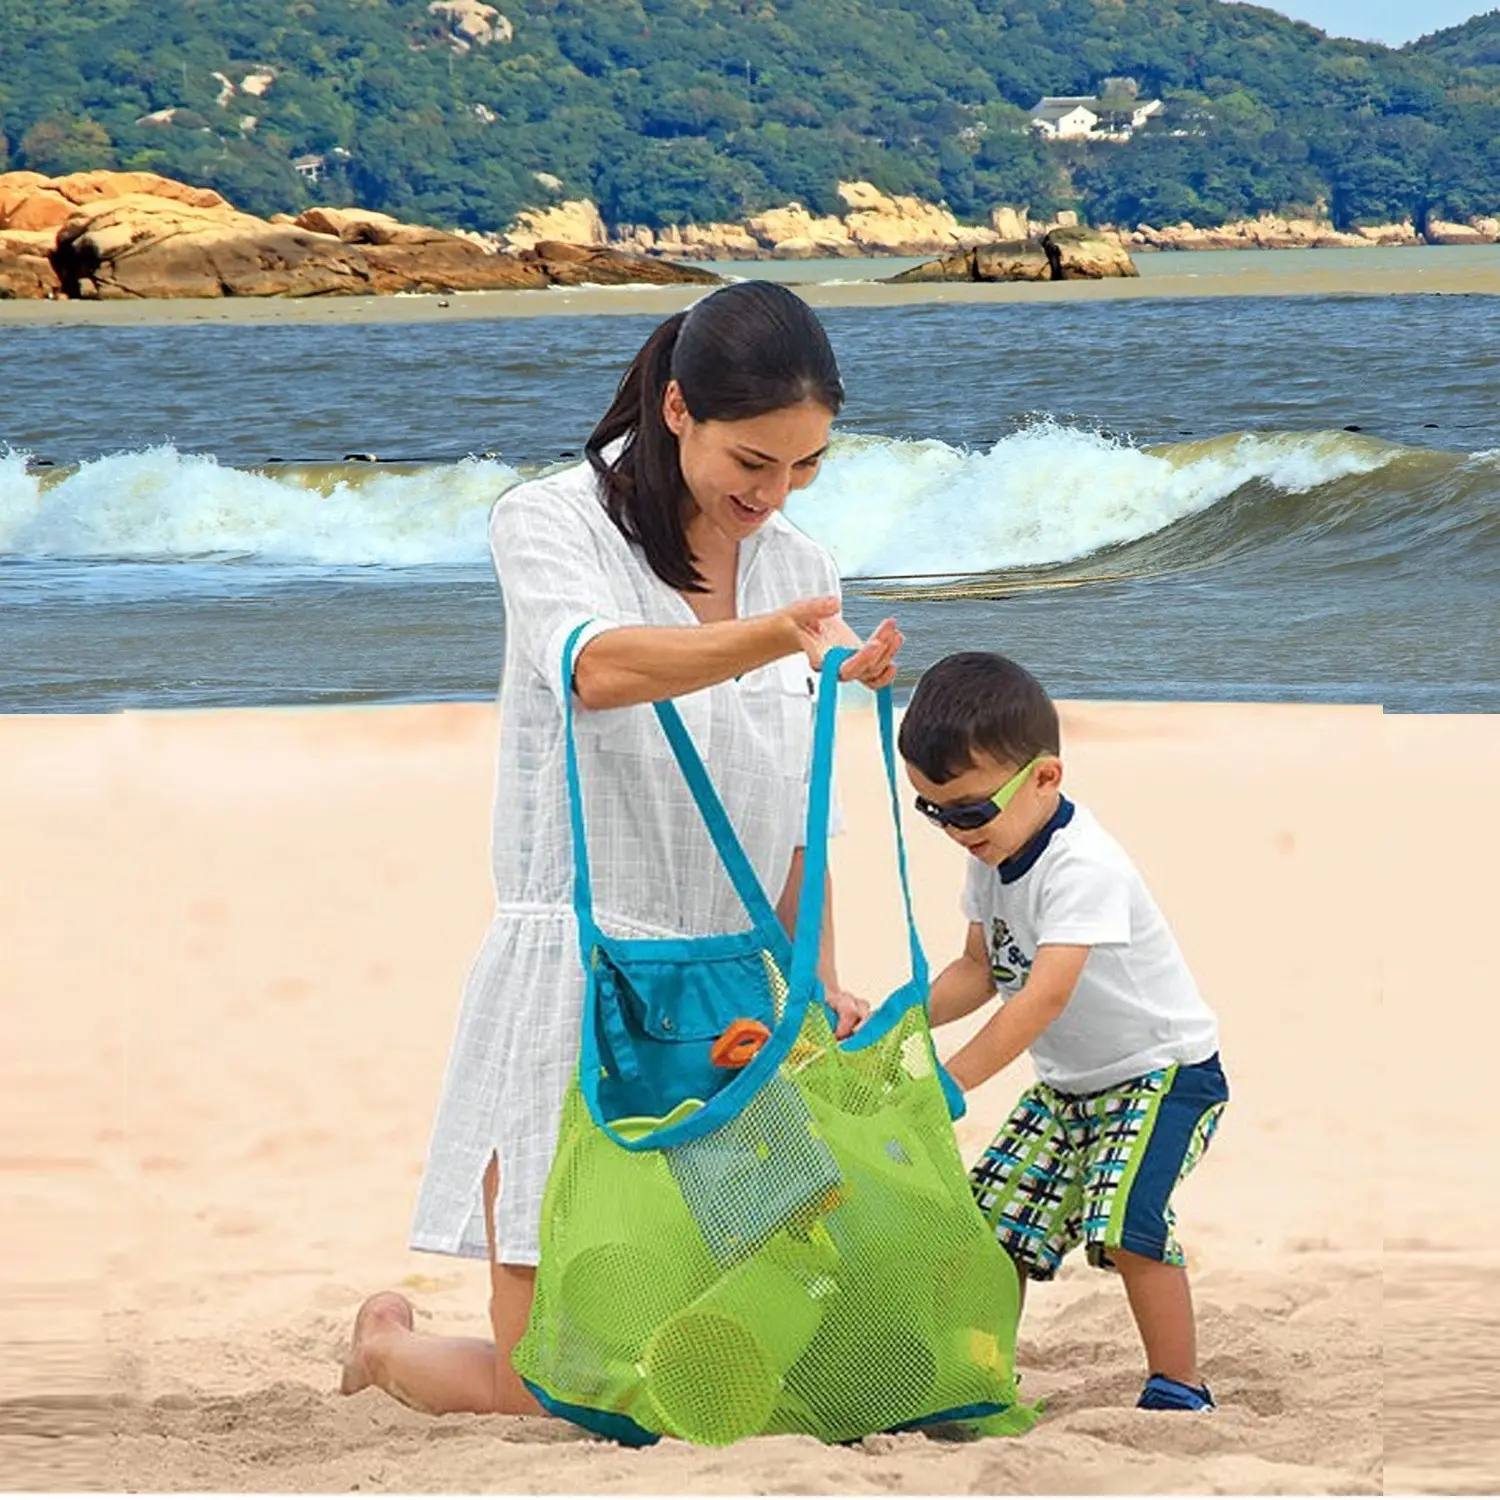 Large Foldable Seashell Bag for Holding Shells Beach Toys Swimming Accessories Collecting Bag Polyester Mesh Beach Tote Bag